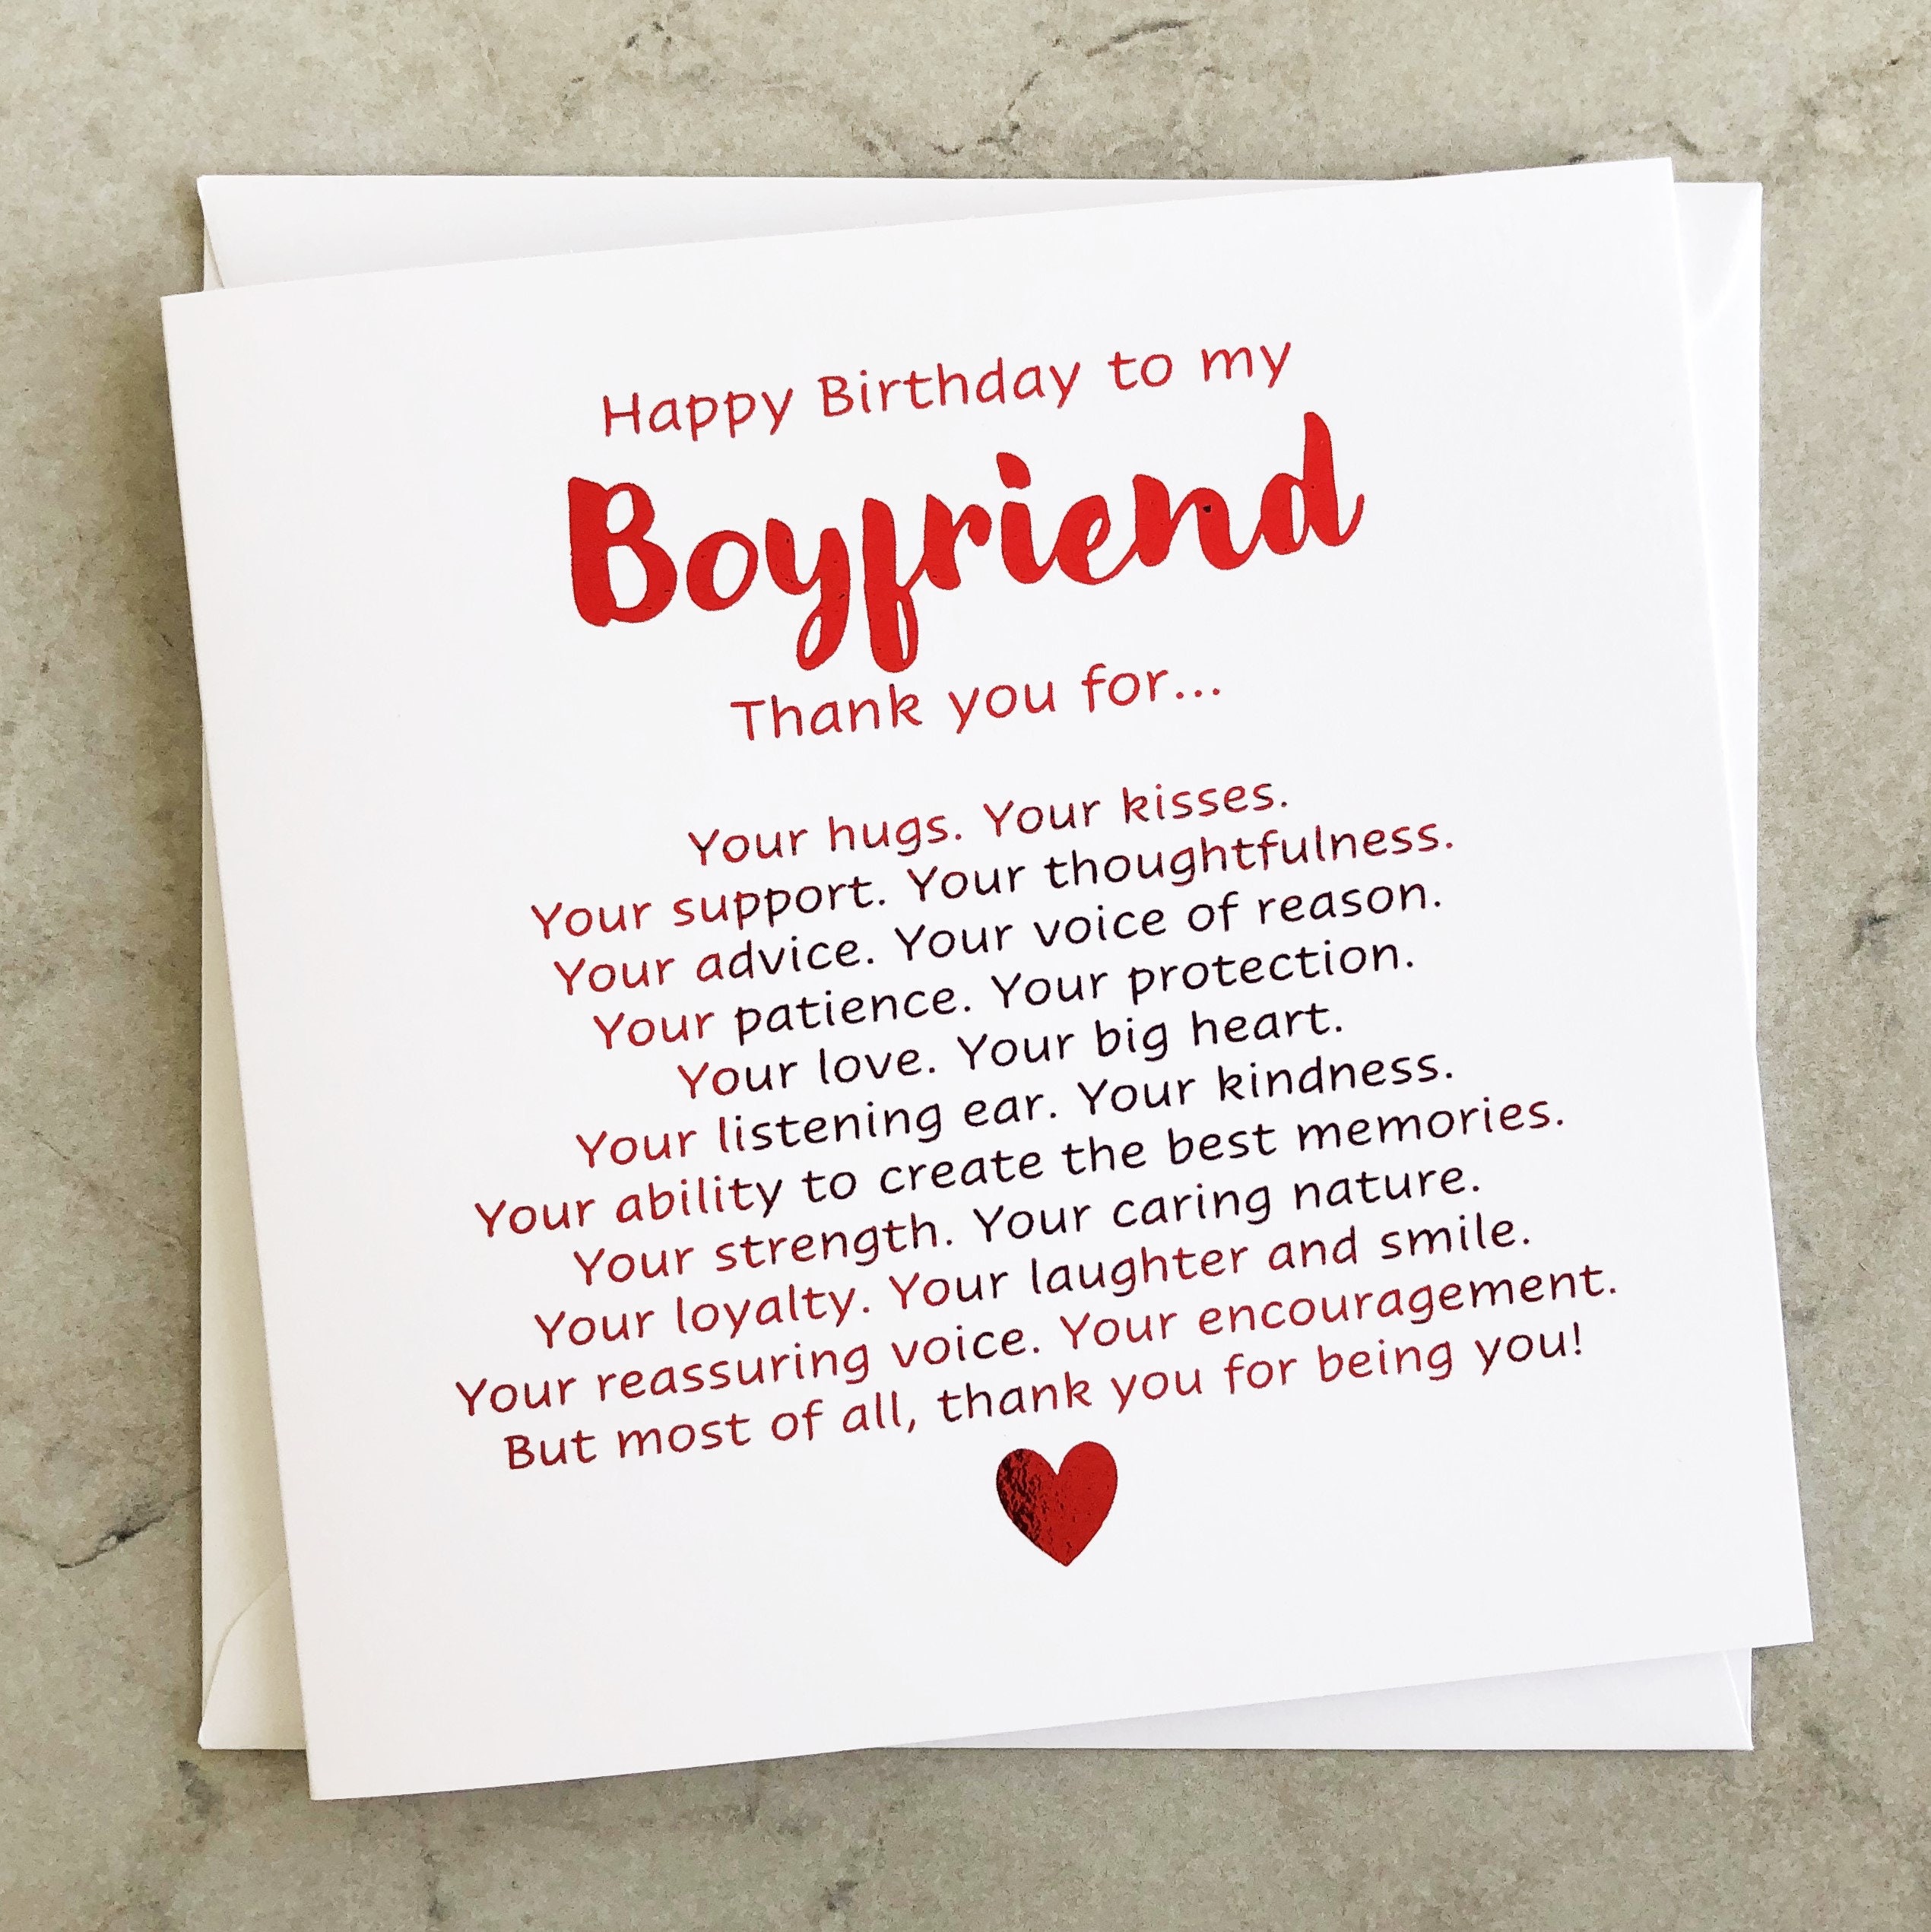 What to Write in a Birthday Card for Your Boyfriend: 16 Ideas